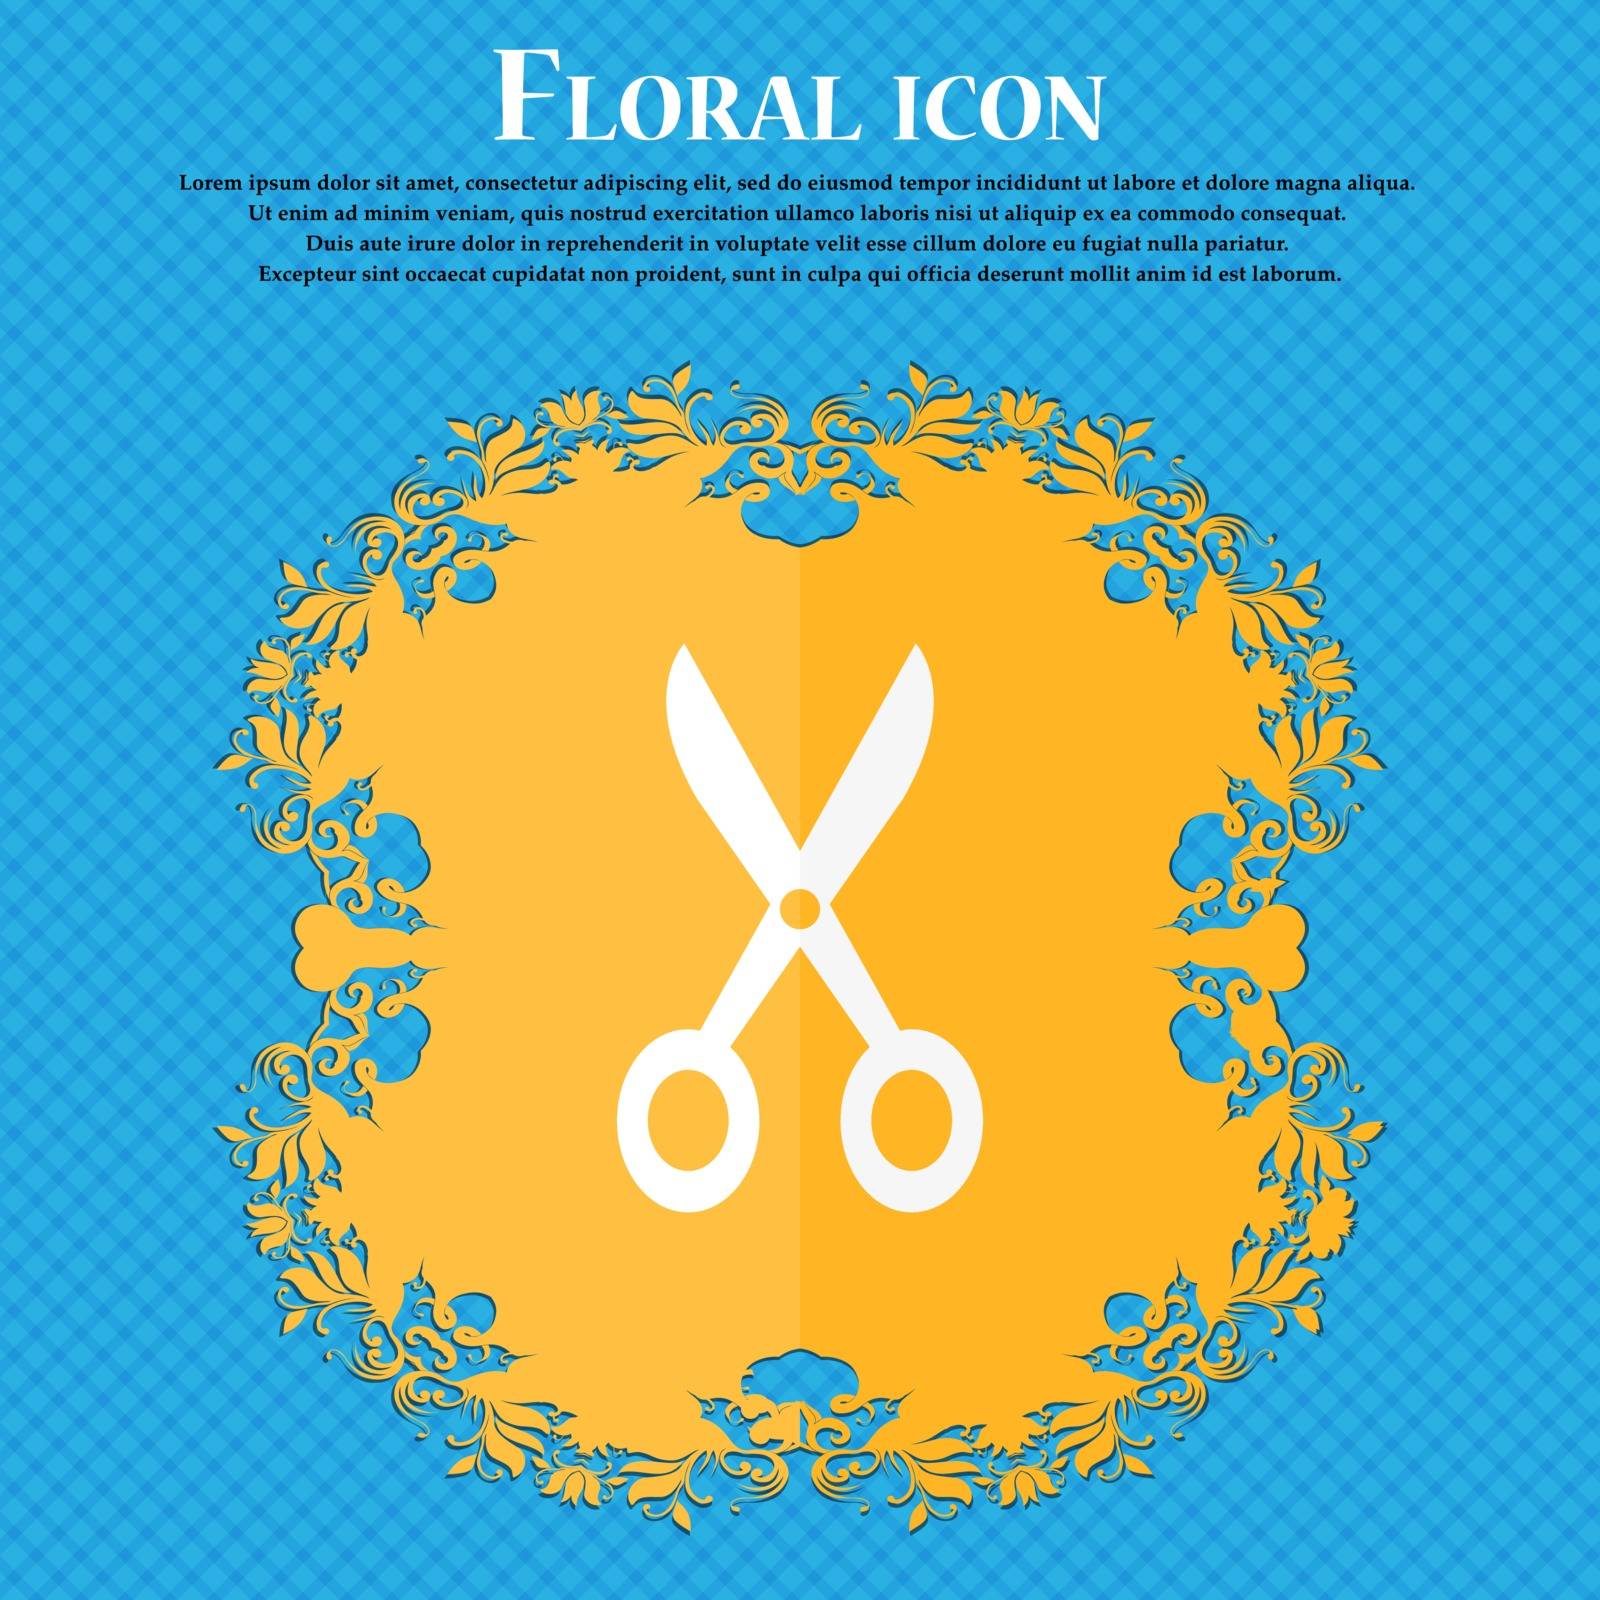 Scissors icon. Floral flat design on a blue abstract background with place for your text. Vector illustration